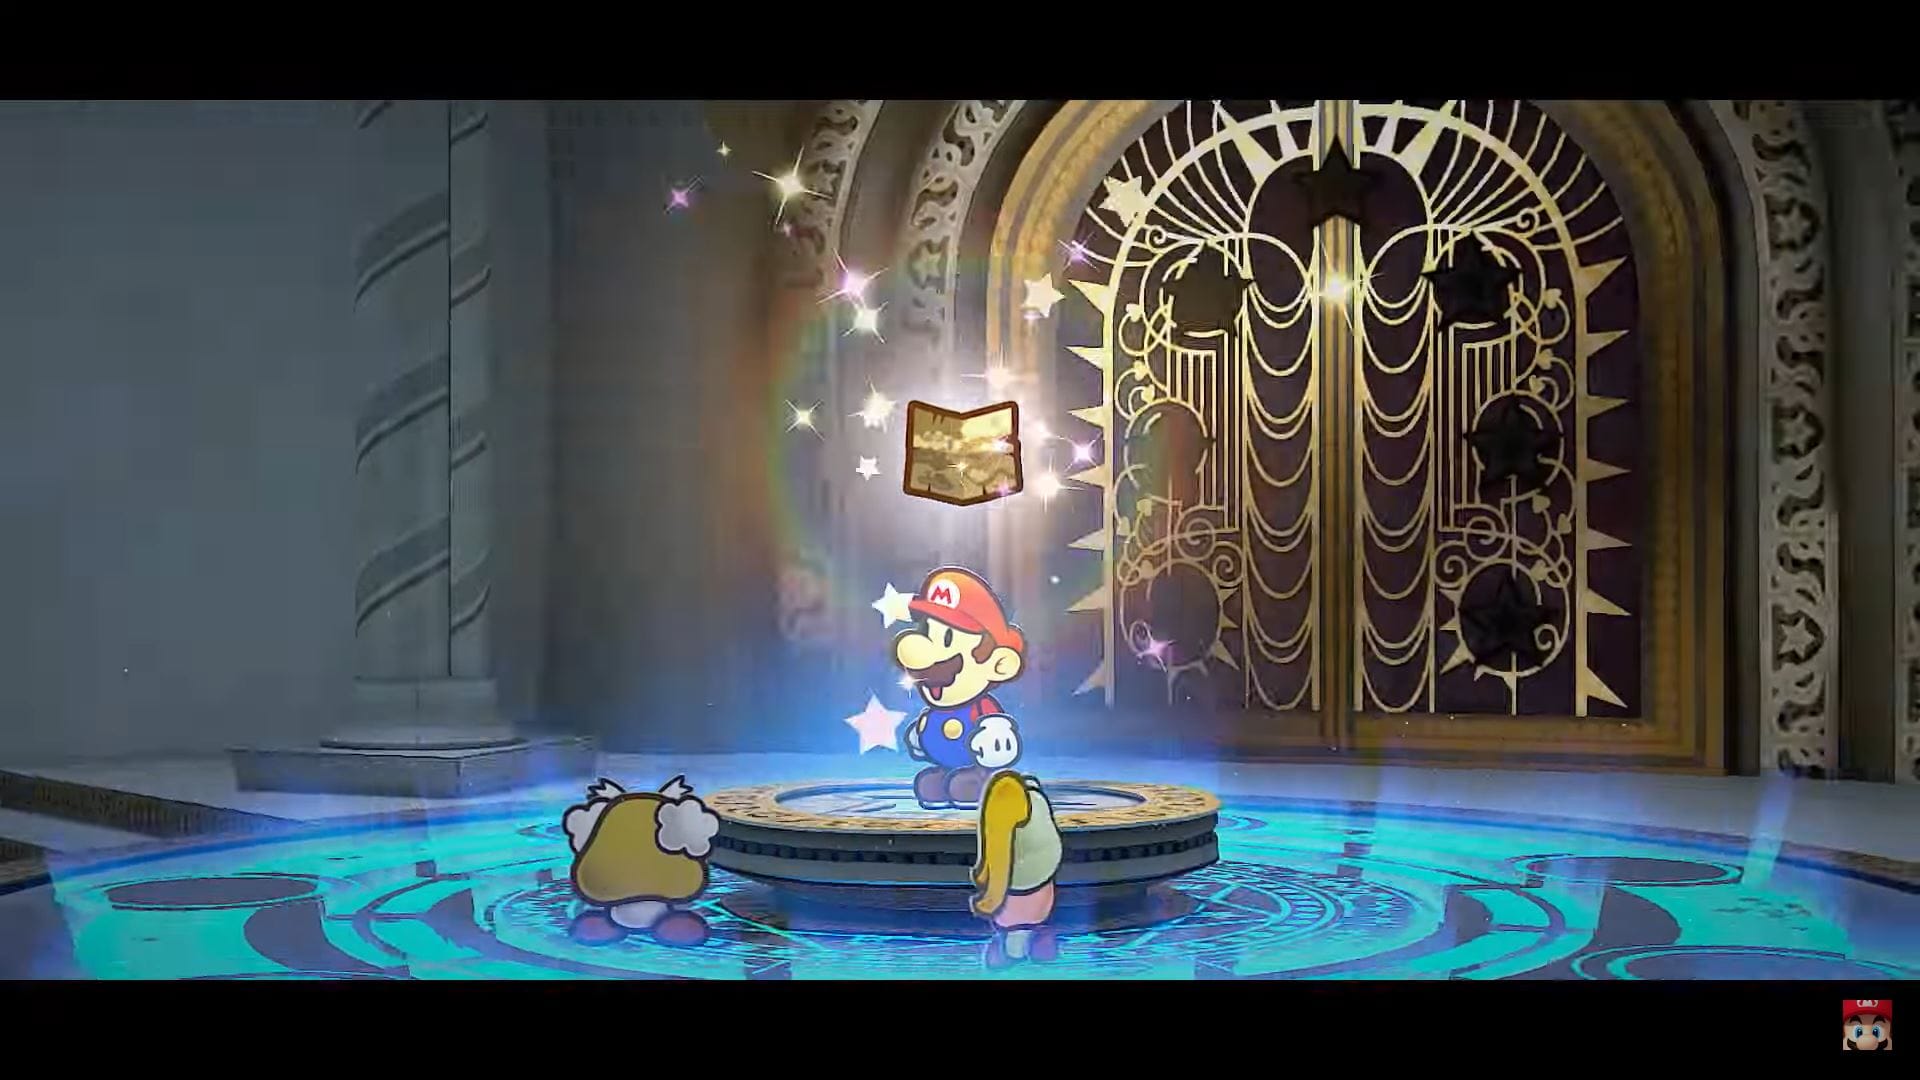 Paper Mario: The Thousand-Year Door Switch Announced - Siliconera